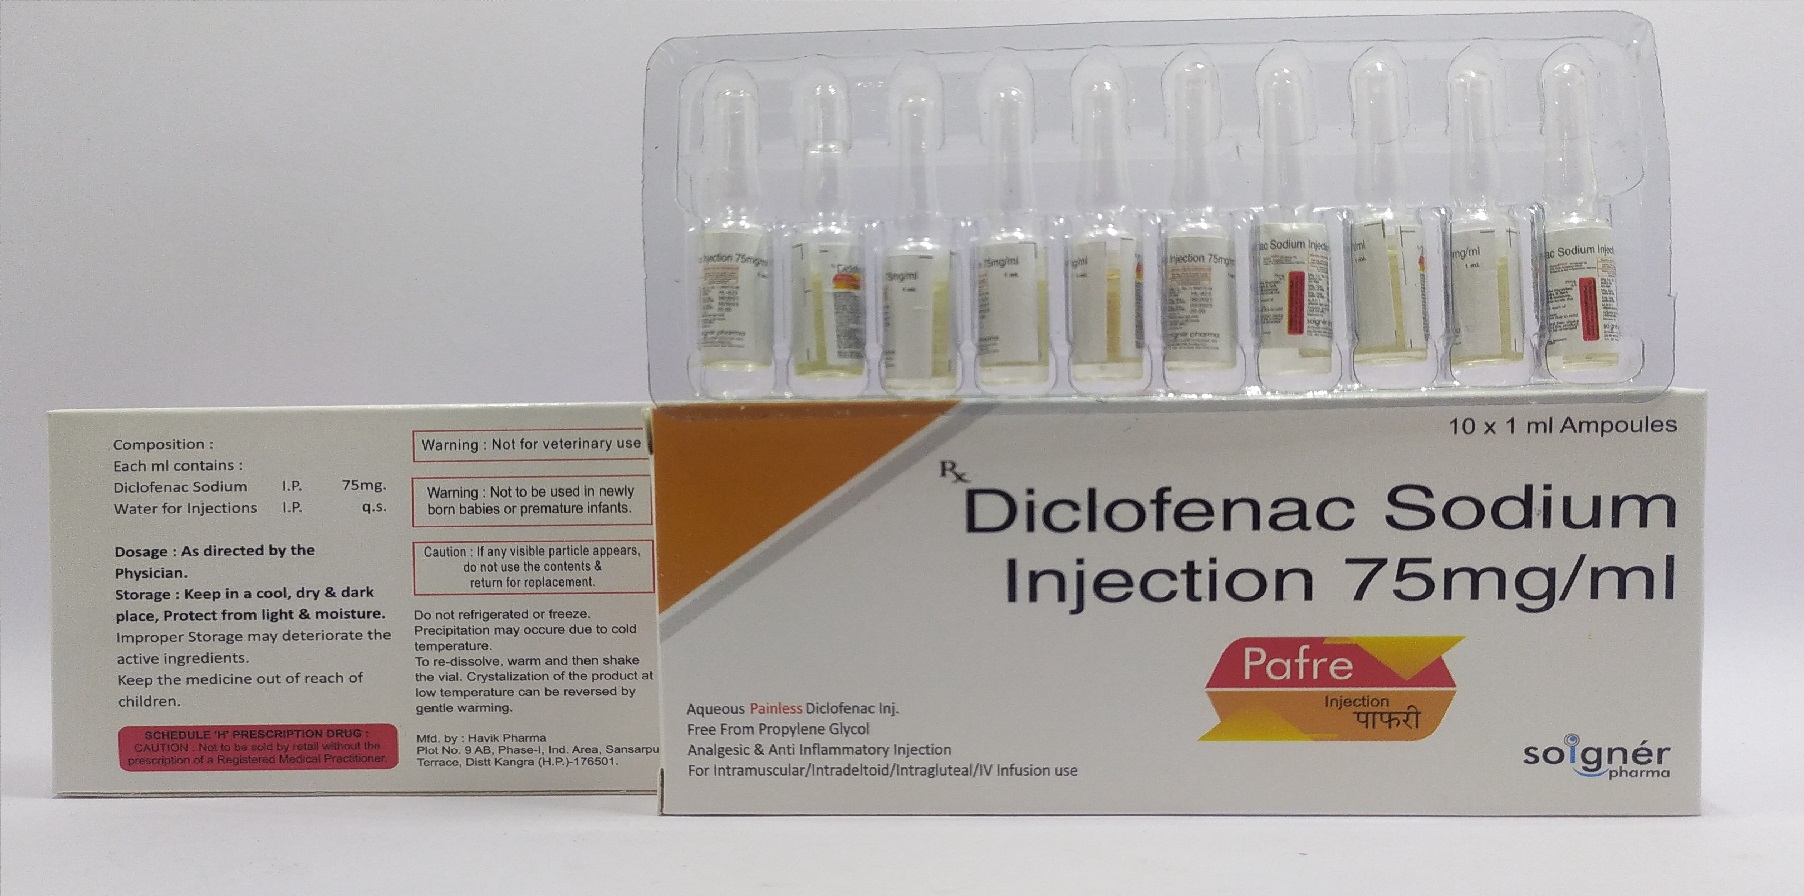 PAFRE INJECTION 